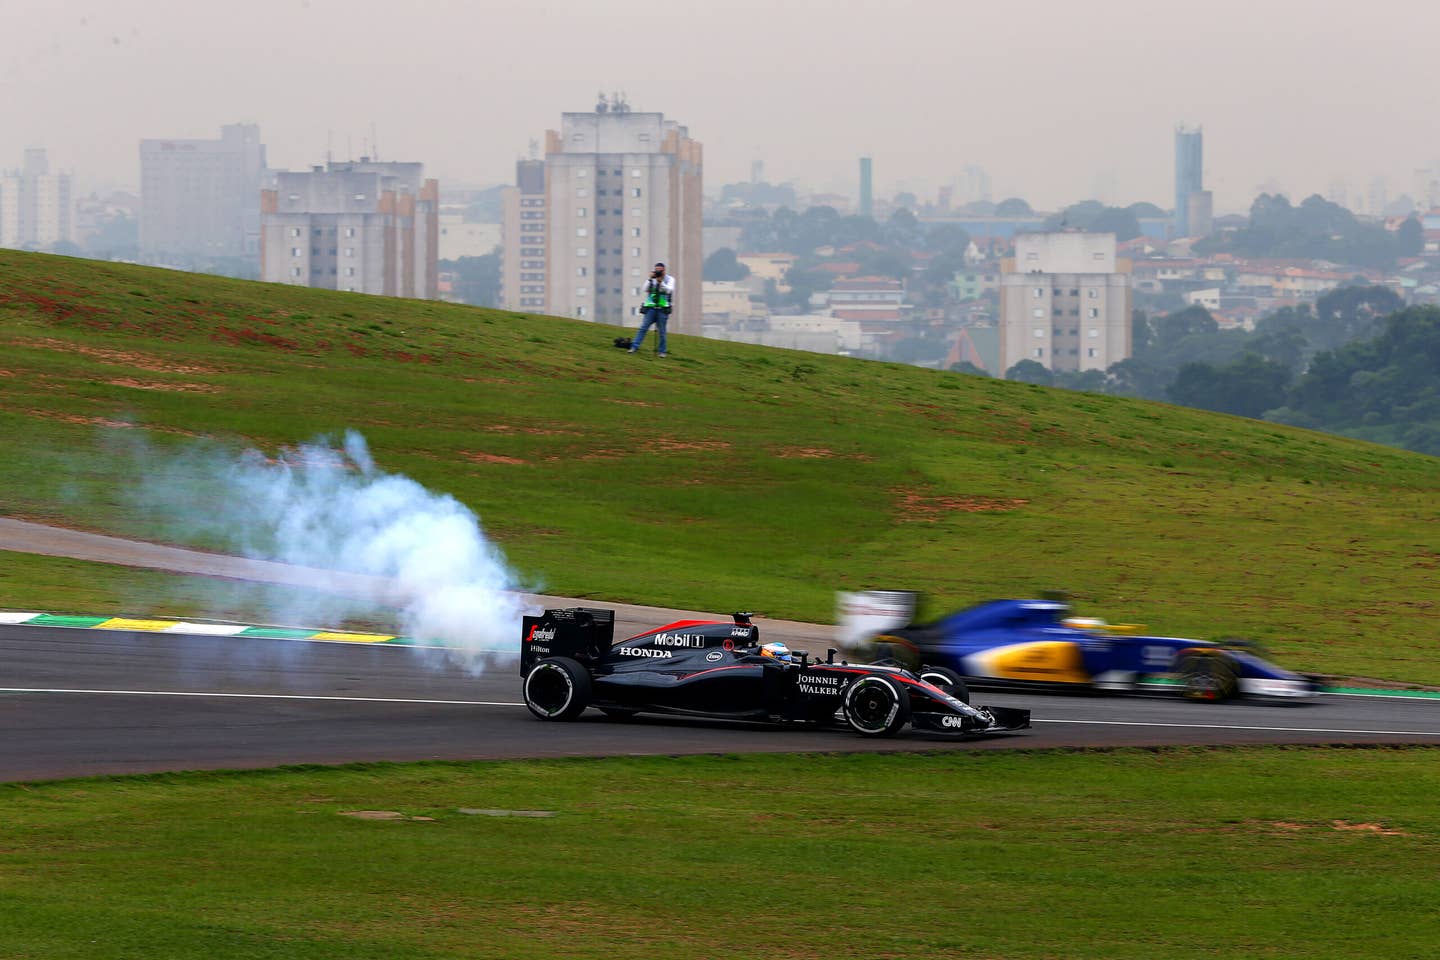 The McLaren MP4-30 with an engine failure during a practice session of the 2015 Brazilian Grand Prix. <em>Getty</em>